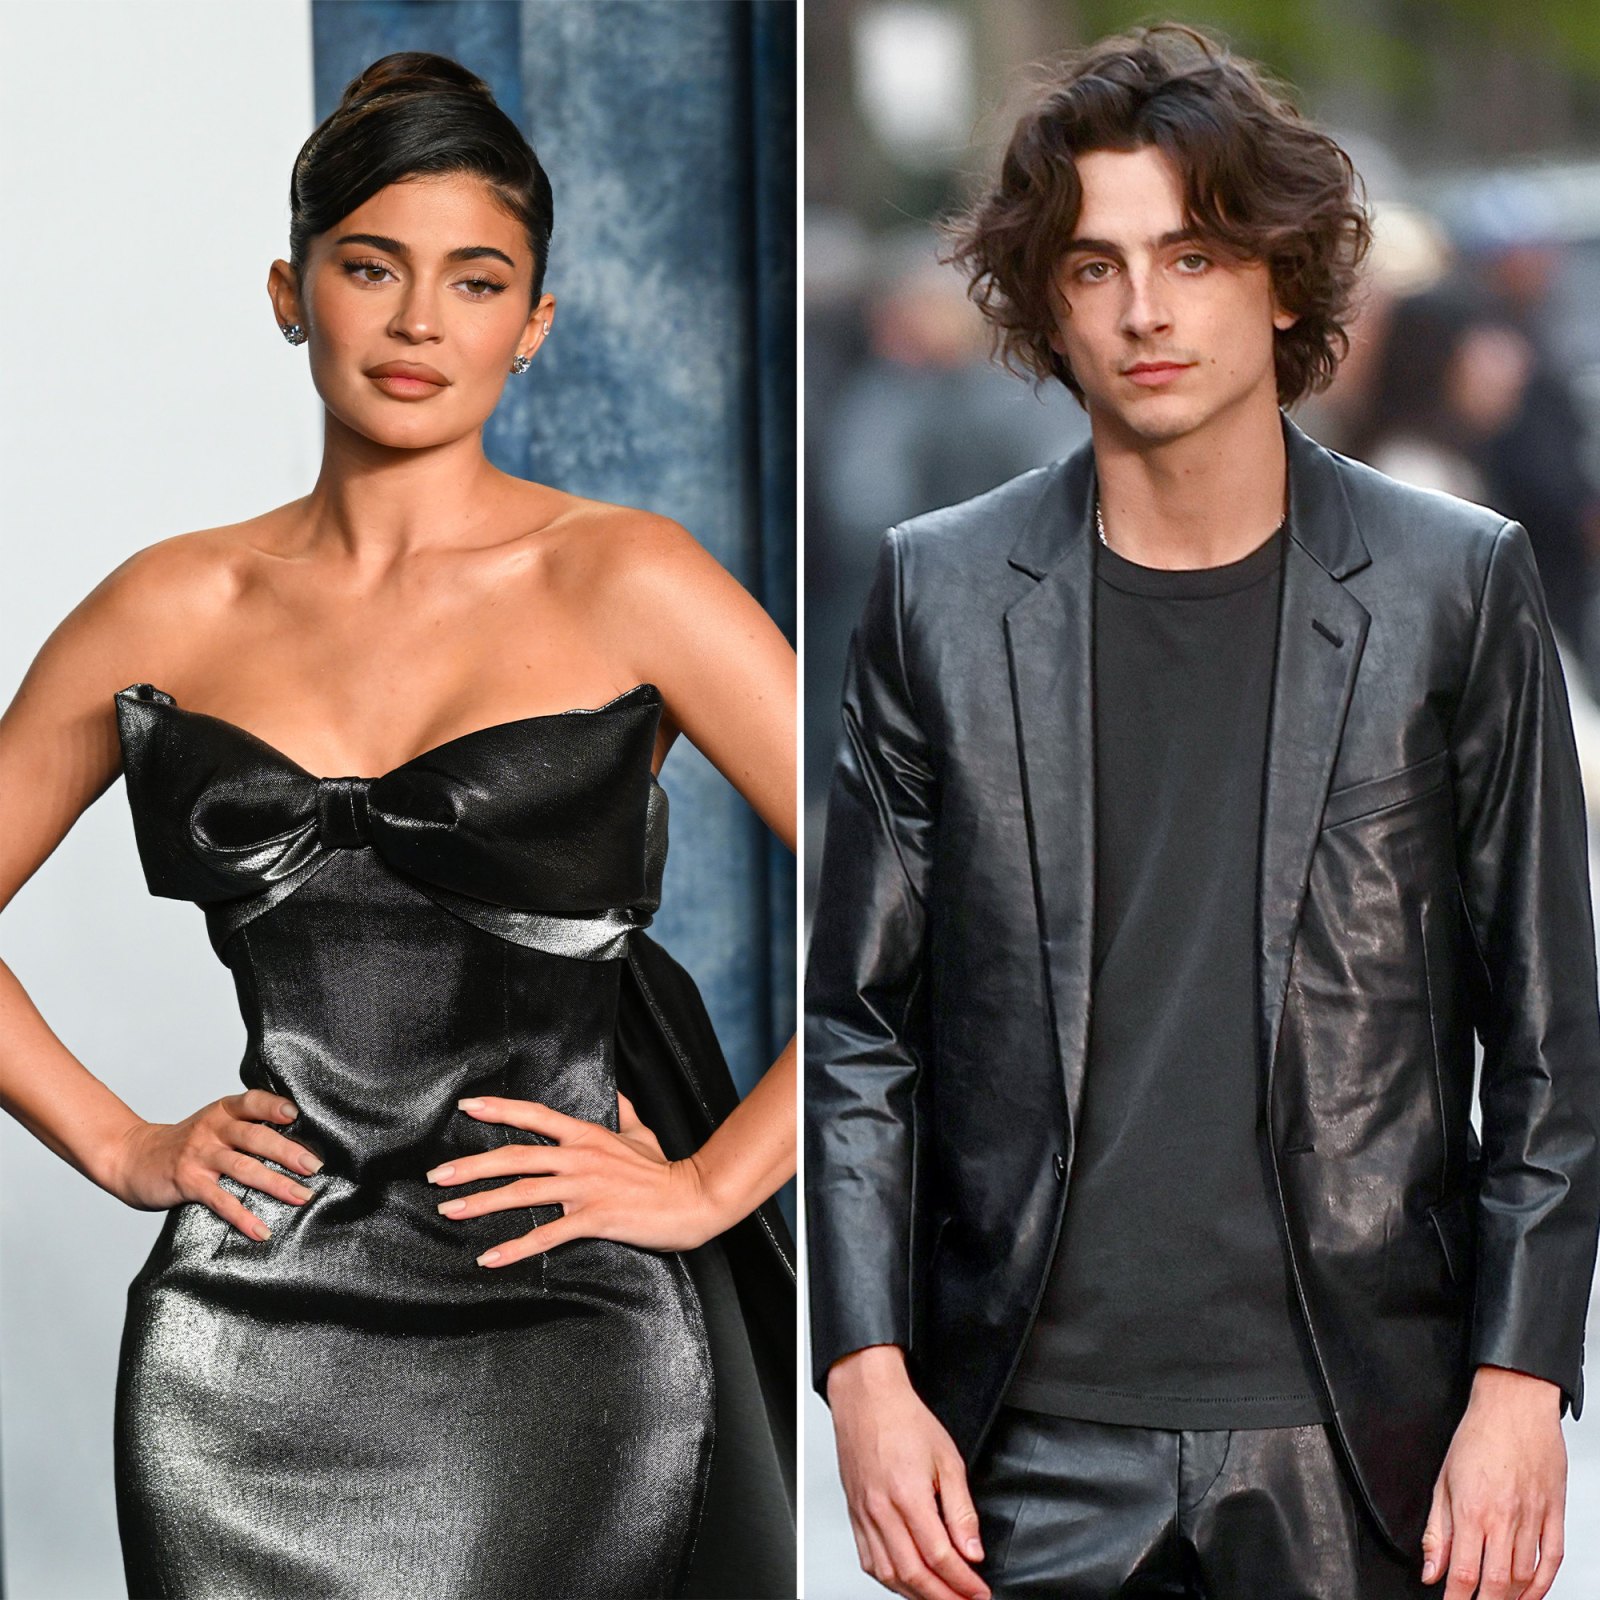 Kylie-Jenner-and-Timothee-Chalamet-s-Relationship-Timeline--From-a-Spring-Fling-to-a--Different--Kind-of-Romance-242